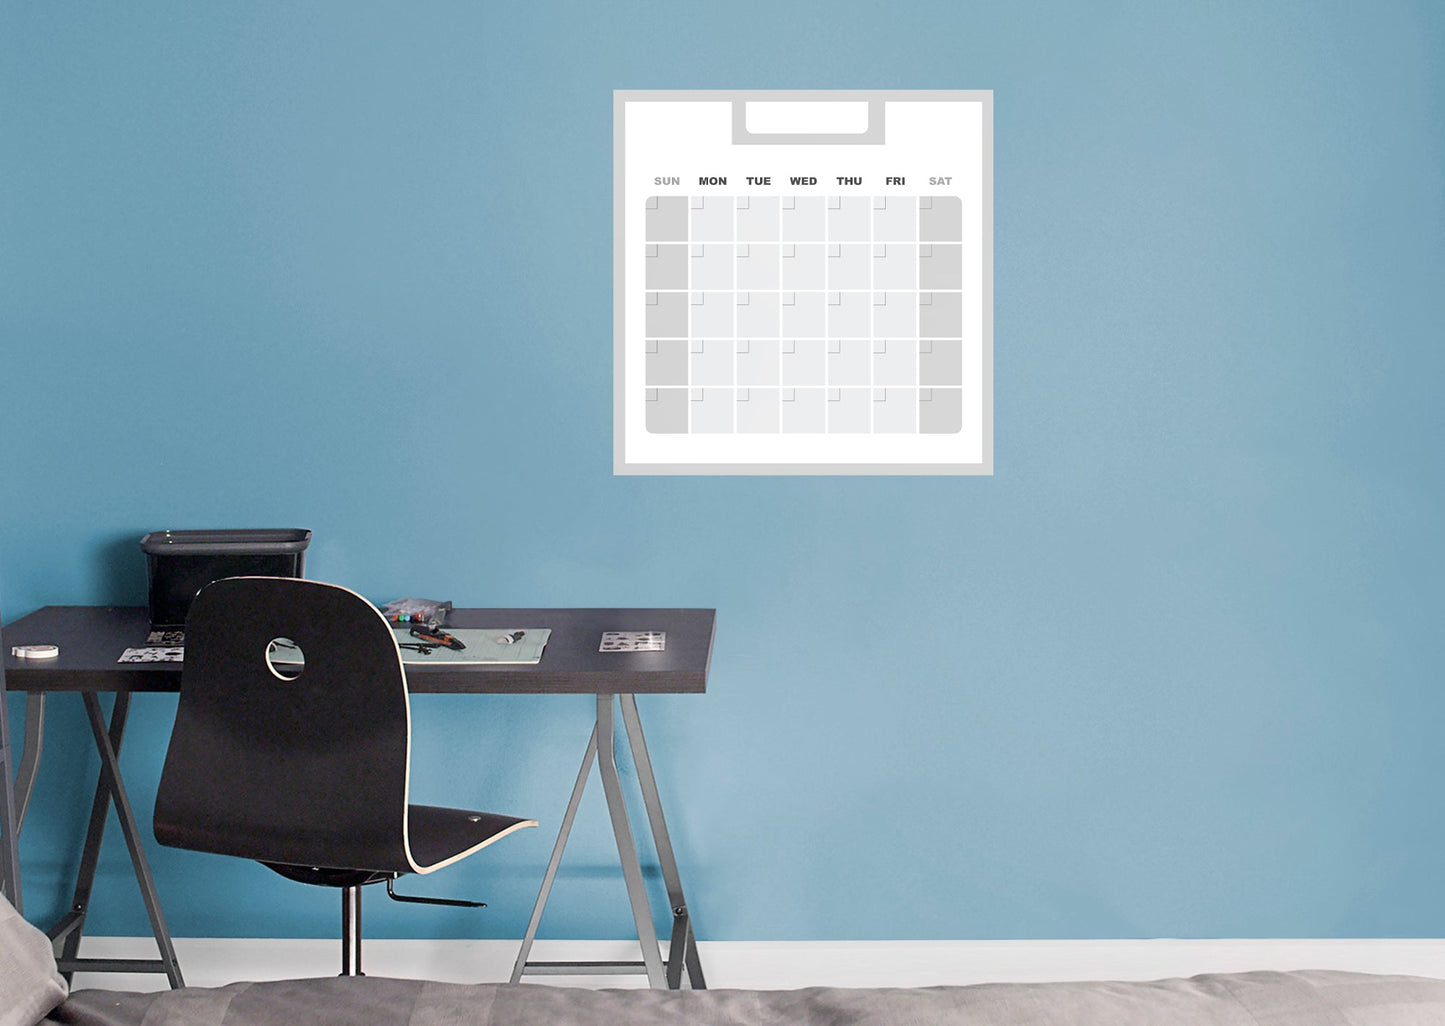 Calendars: Grey Square Modern One Month Calendar Dry Erase - Removable Adhesive Decal